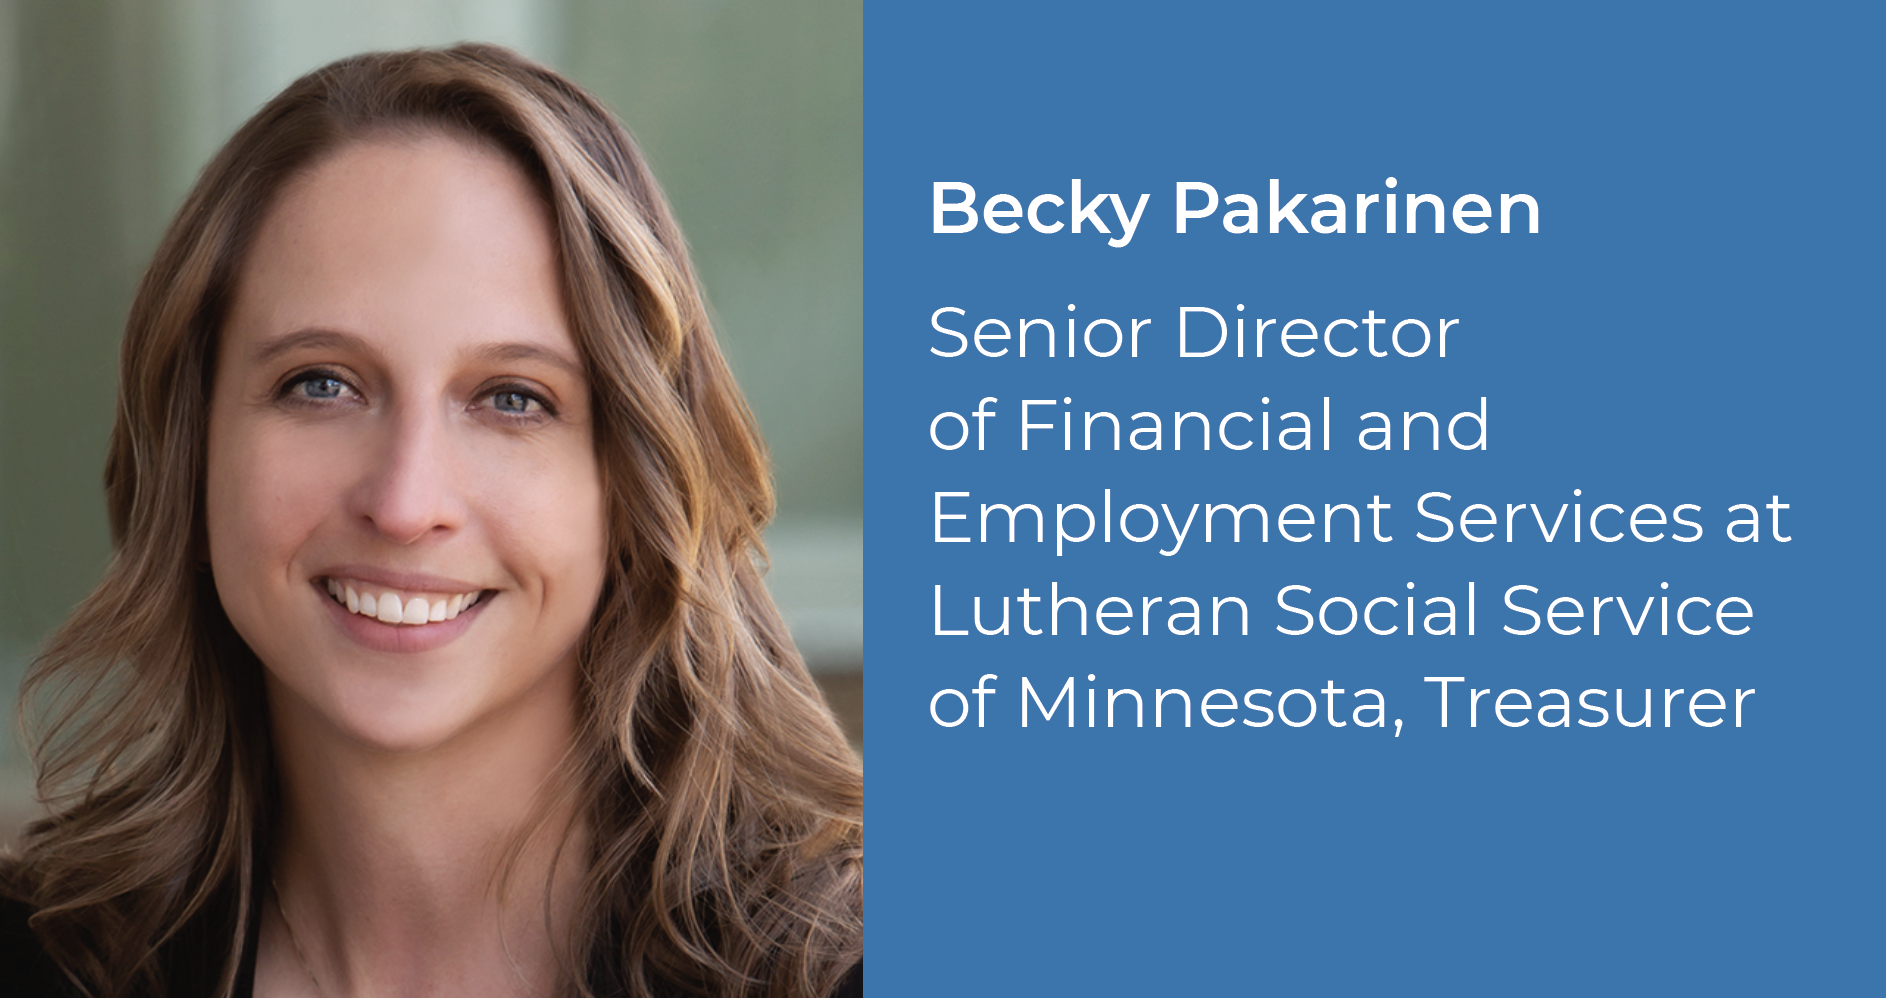 Becky Pakarinen Senior Director of Financial and Employment Services at Lutheran Social Service of Minnesota, Treasurer